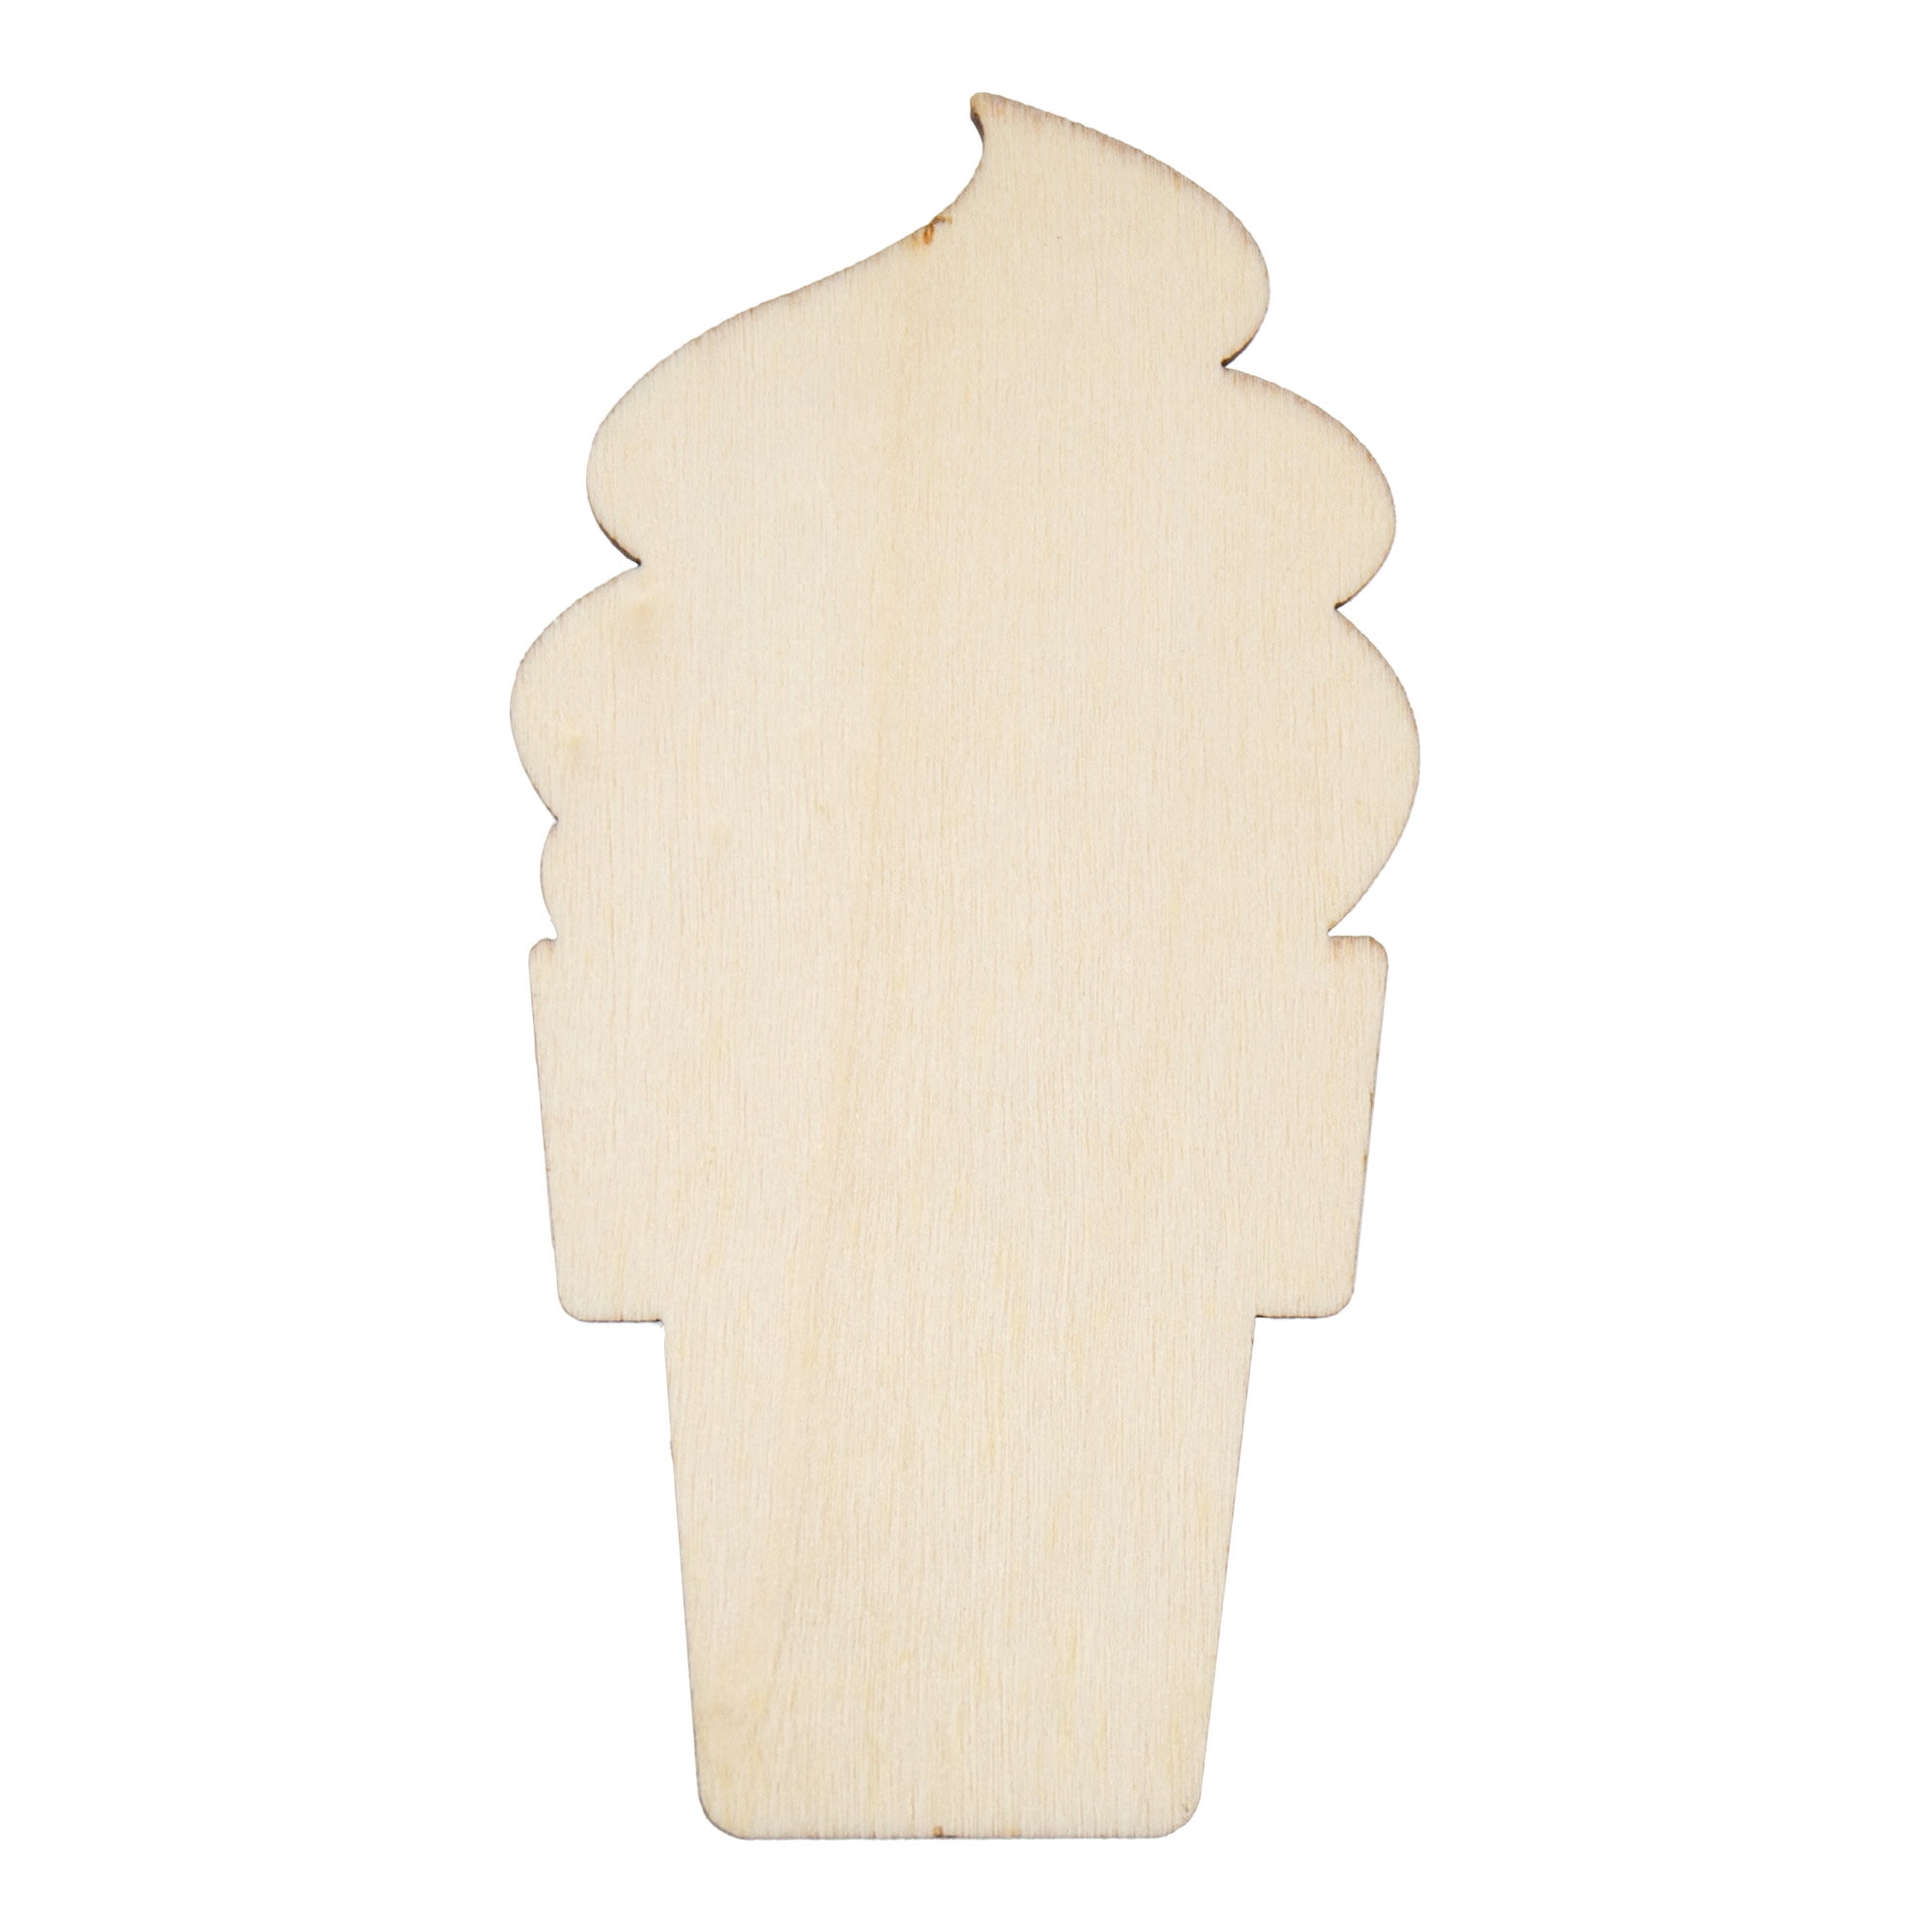 Hello Hobby Wood Heart Shape, Ready-to-Decorate Die-Cut Shape, 3.85 in. x  0.145 in. x 3 in. 